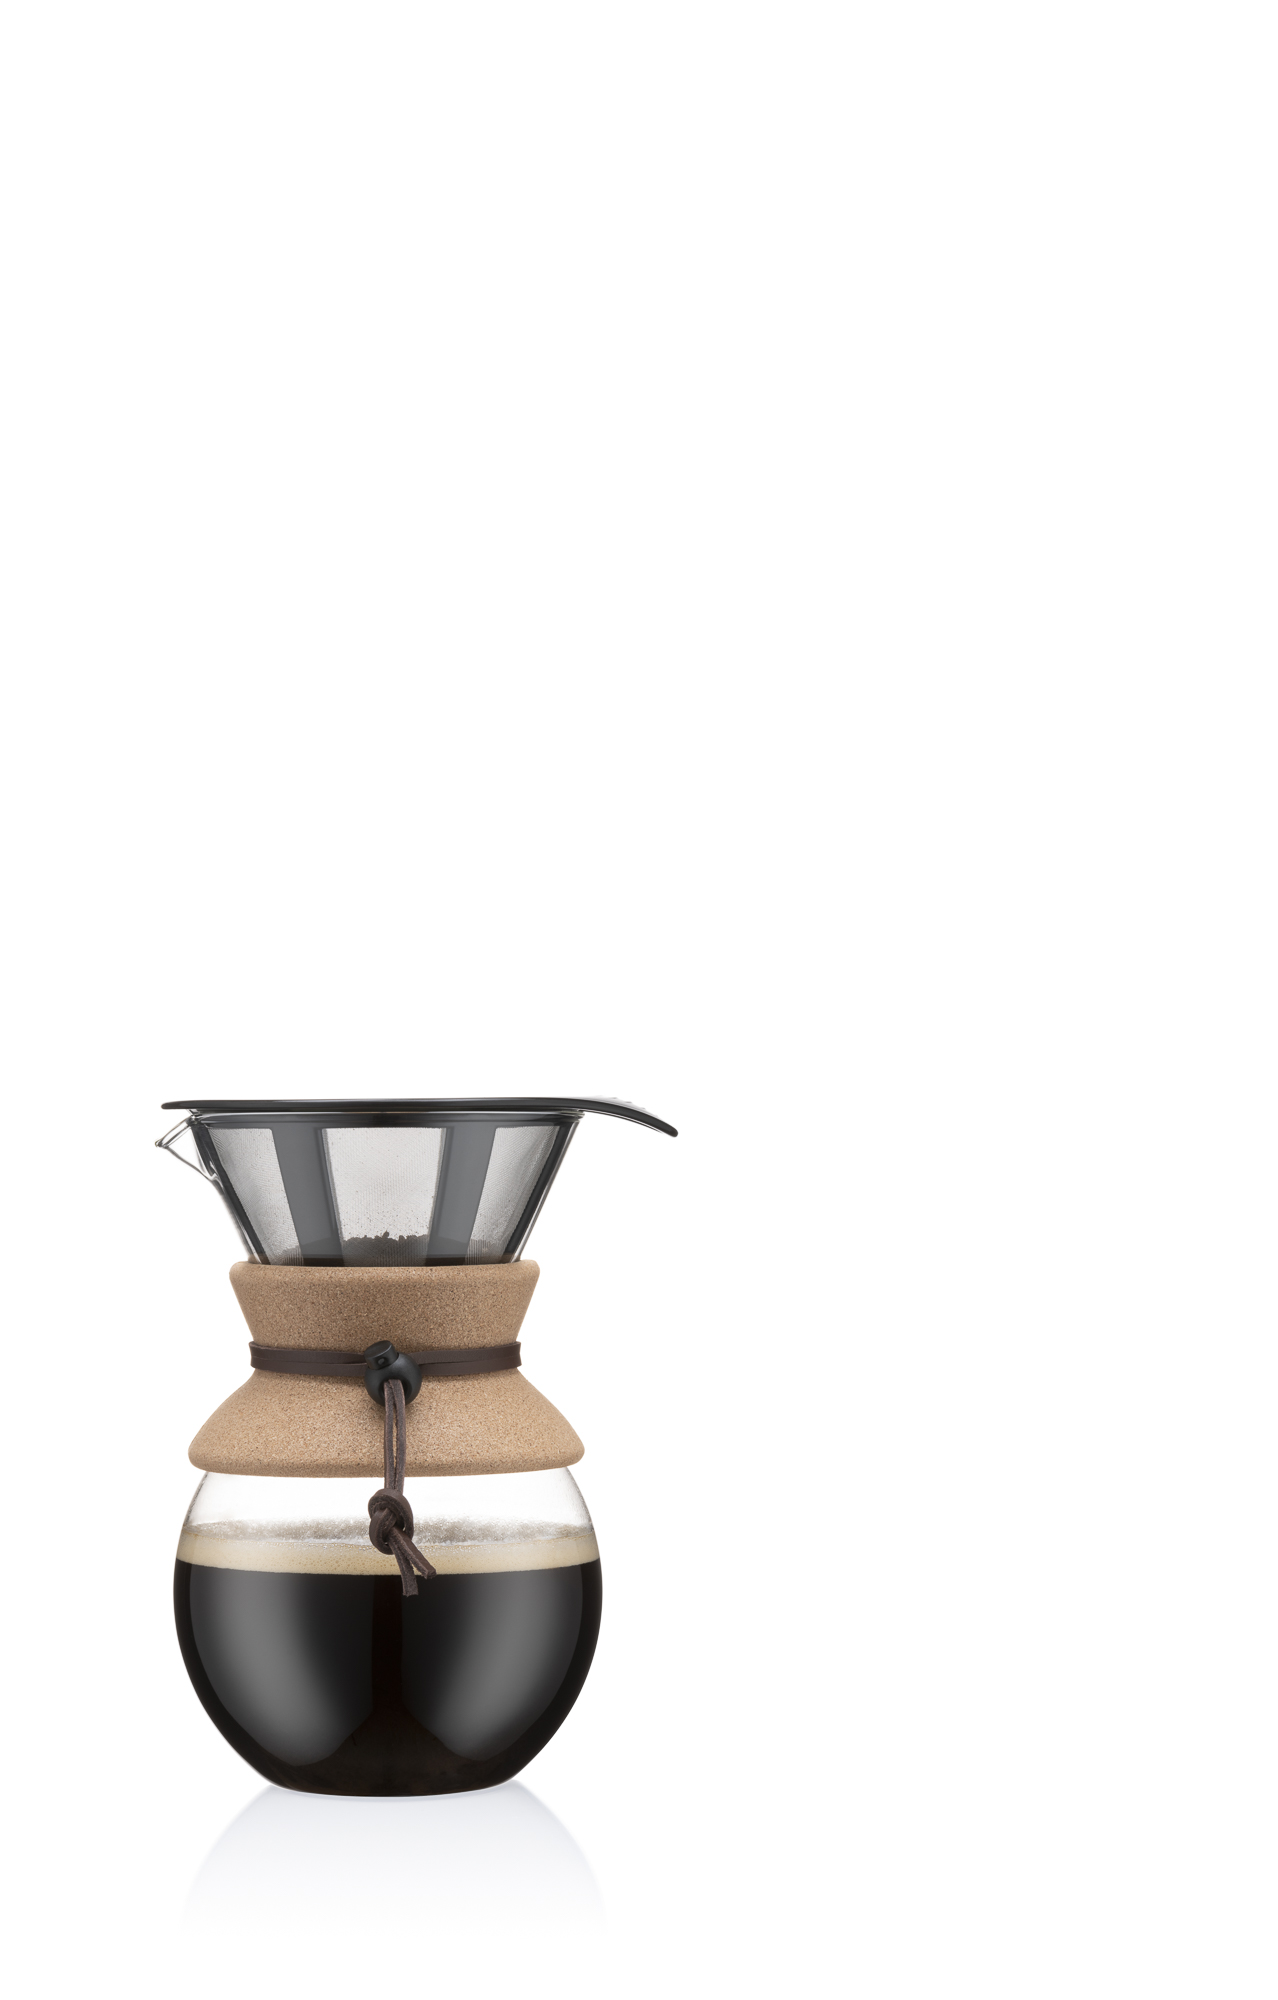 BODUM Pour Over Coffee Maker with Permanent Filter, 34 Ounce, Cork - image 4 of 8